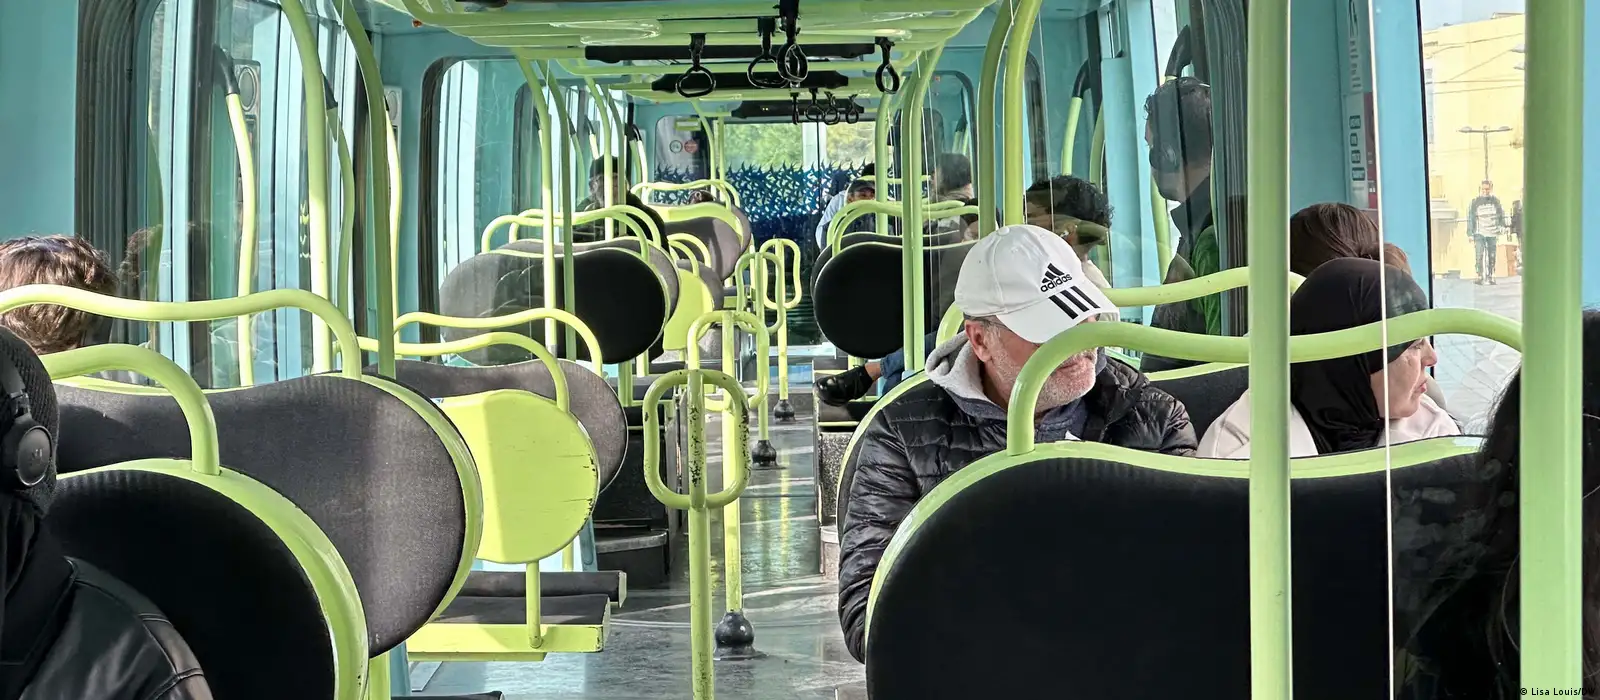 Passengers sitting on a bus